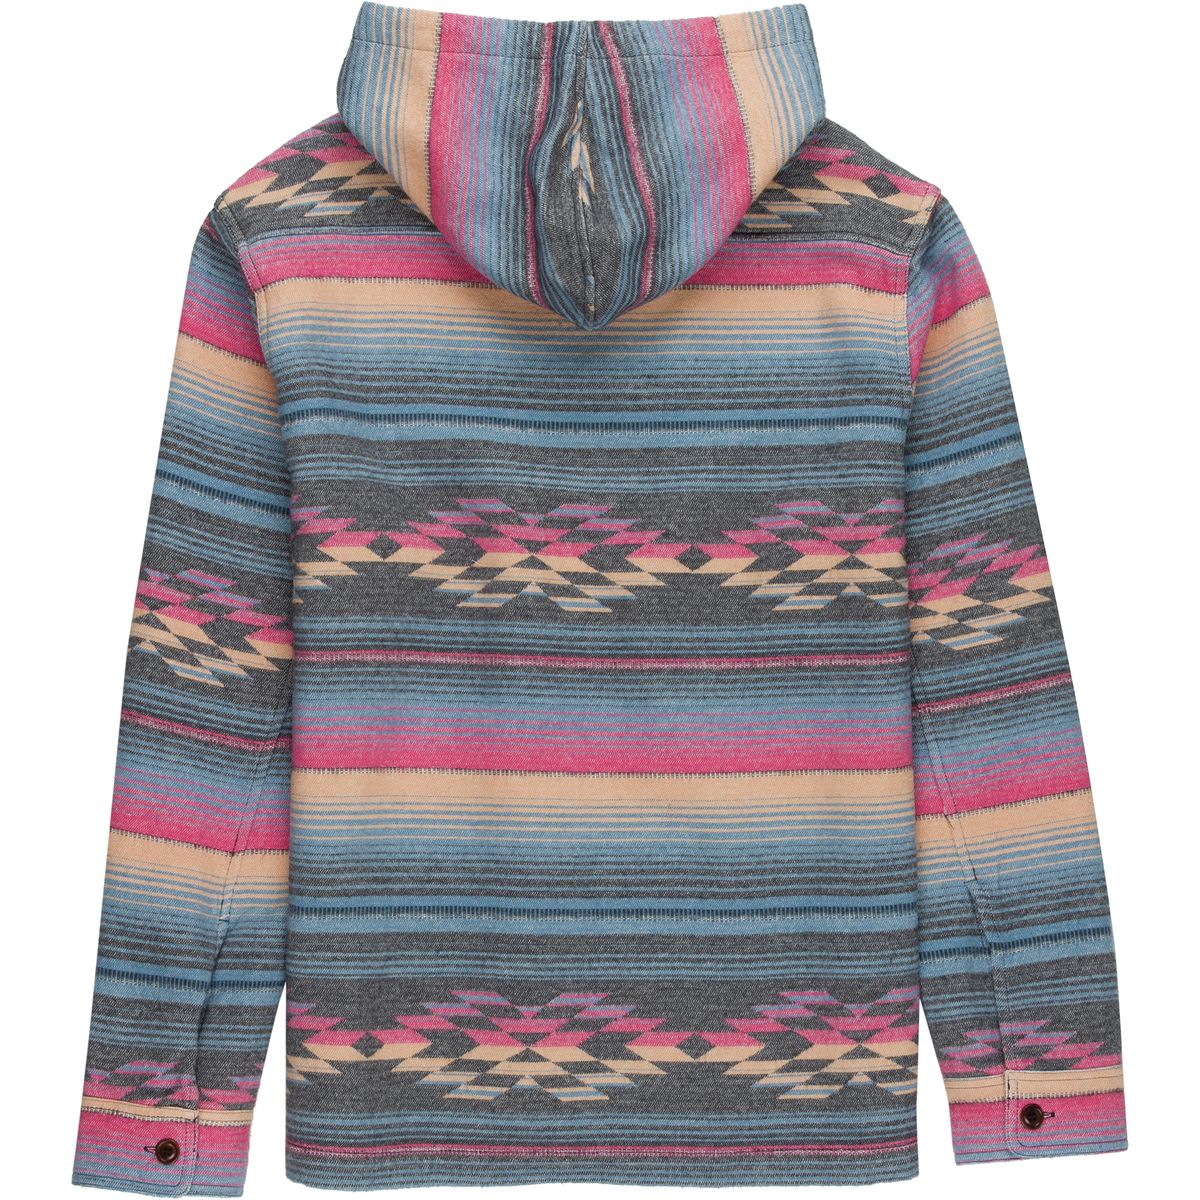 Faherty Pacific Hooded Poncho - Men's - Clothing